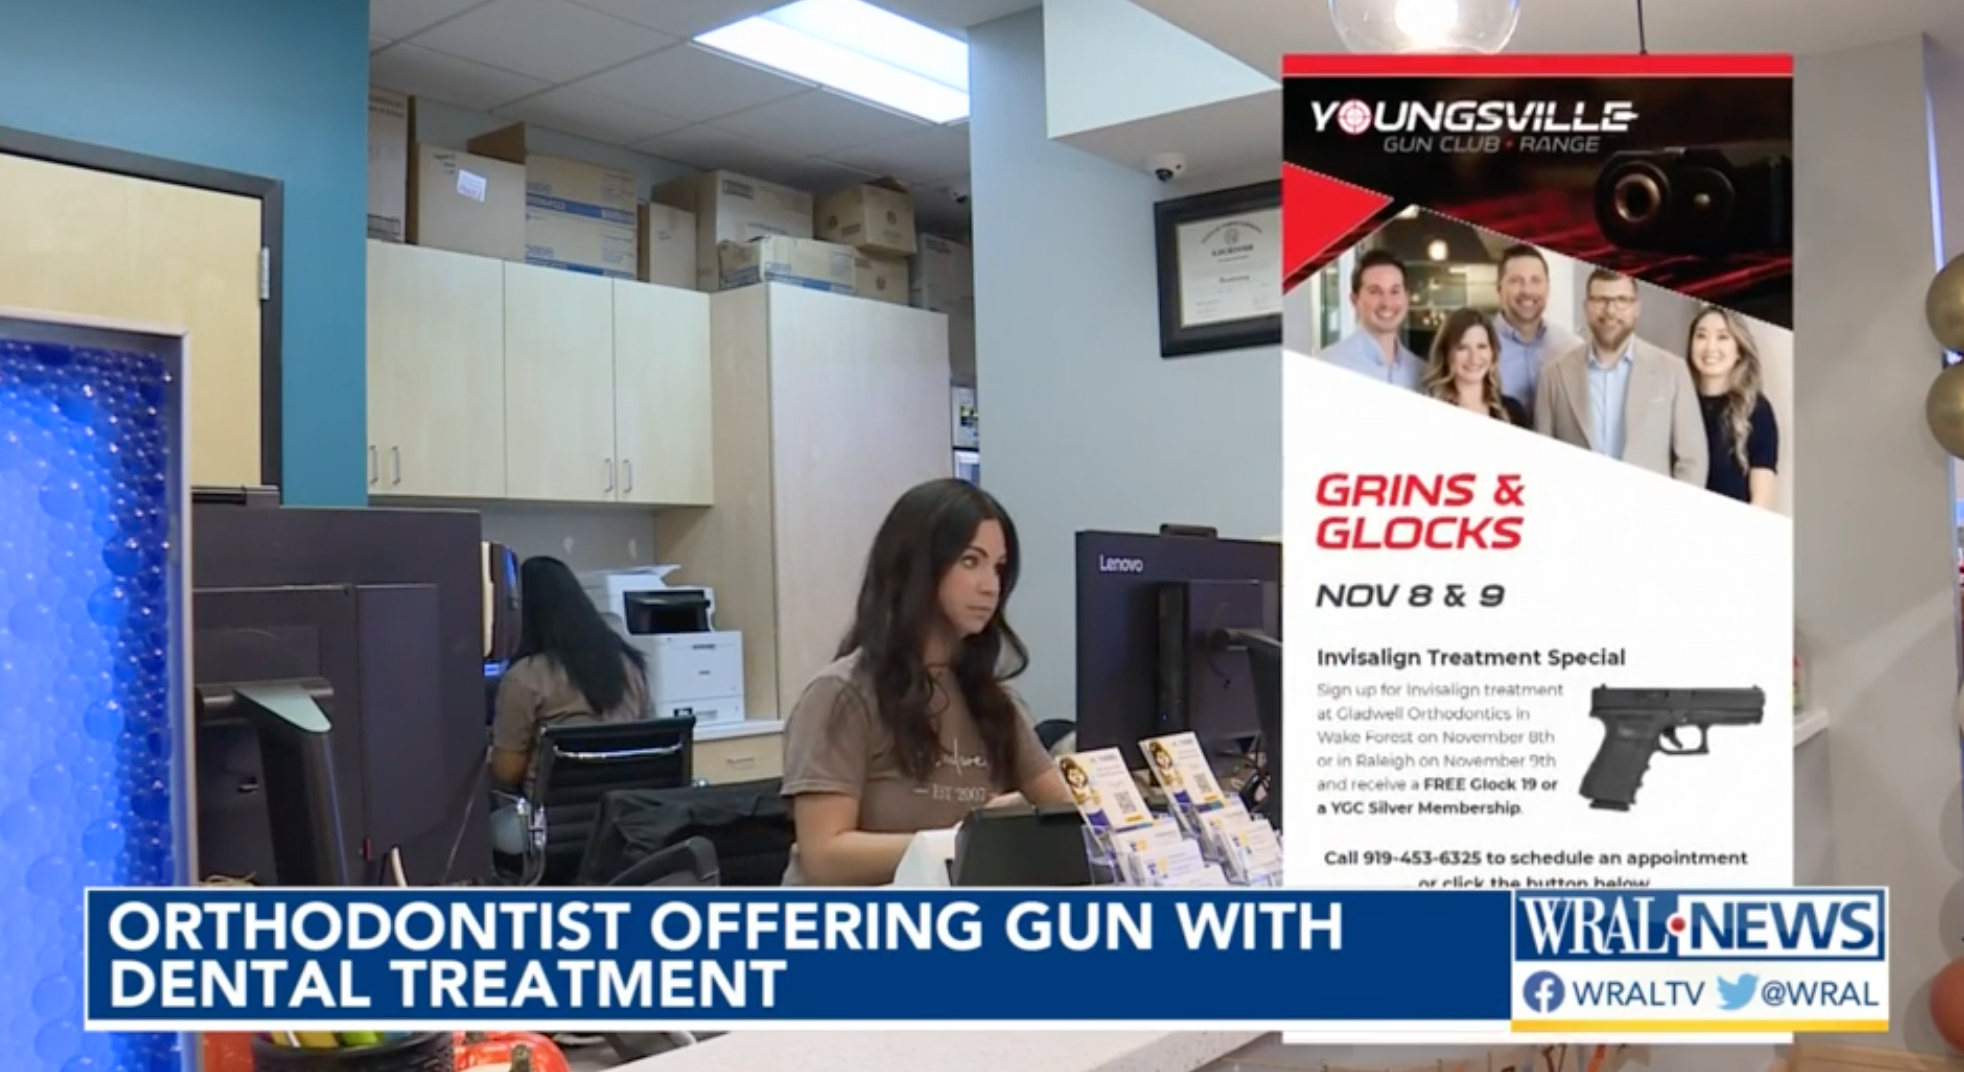 ‘Grins and Glocks’: Wake Forest orthodontist offers free gun with Invisalign treatment